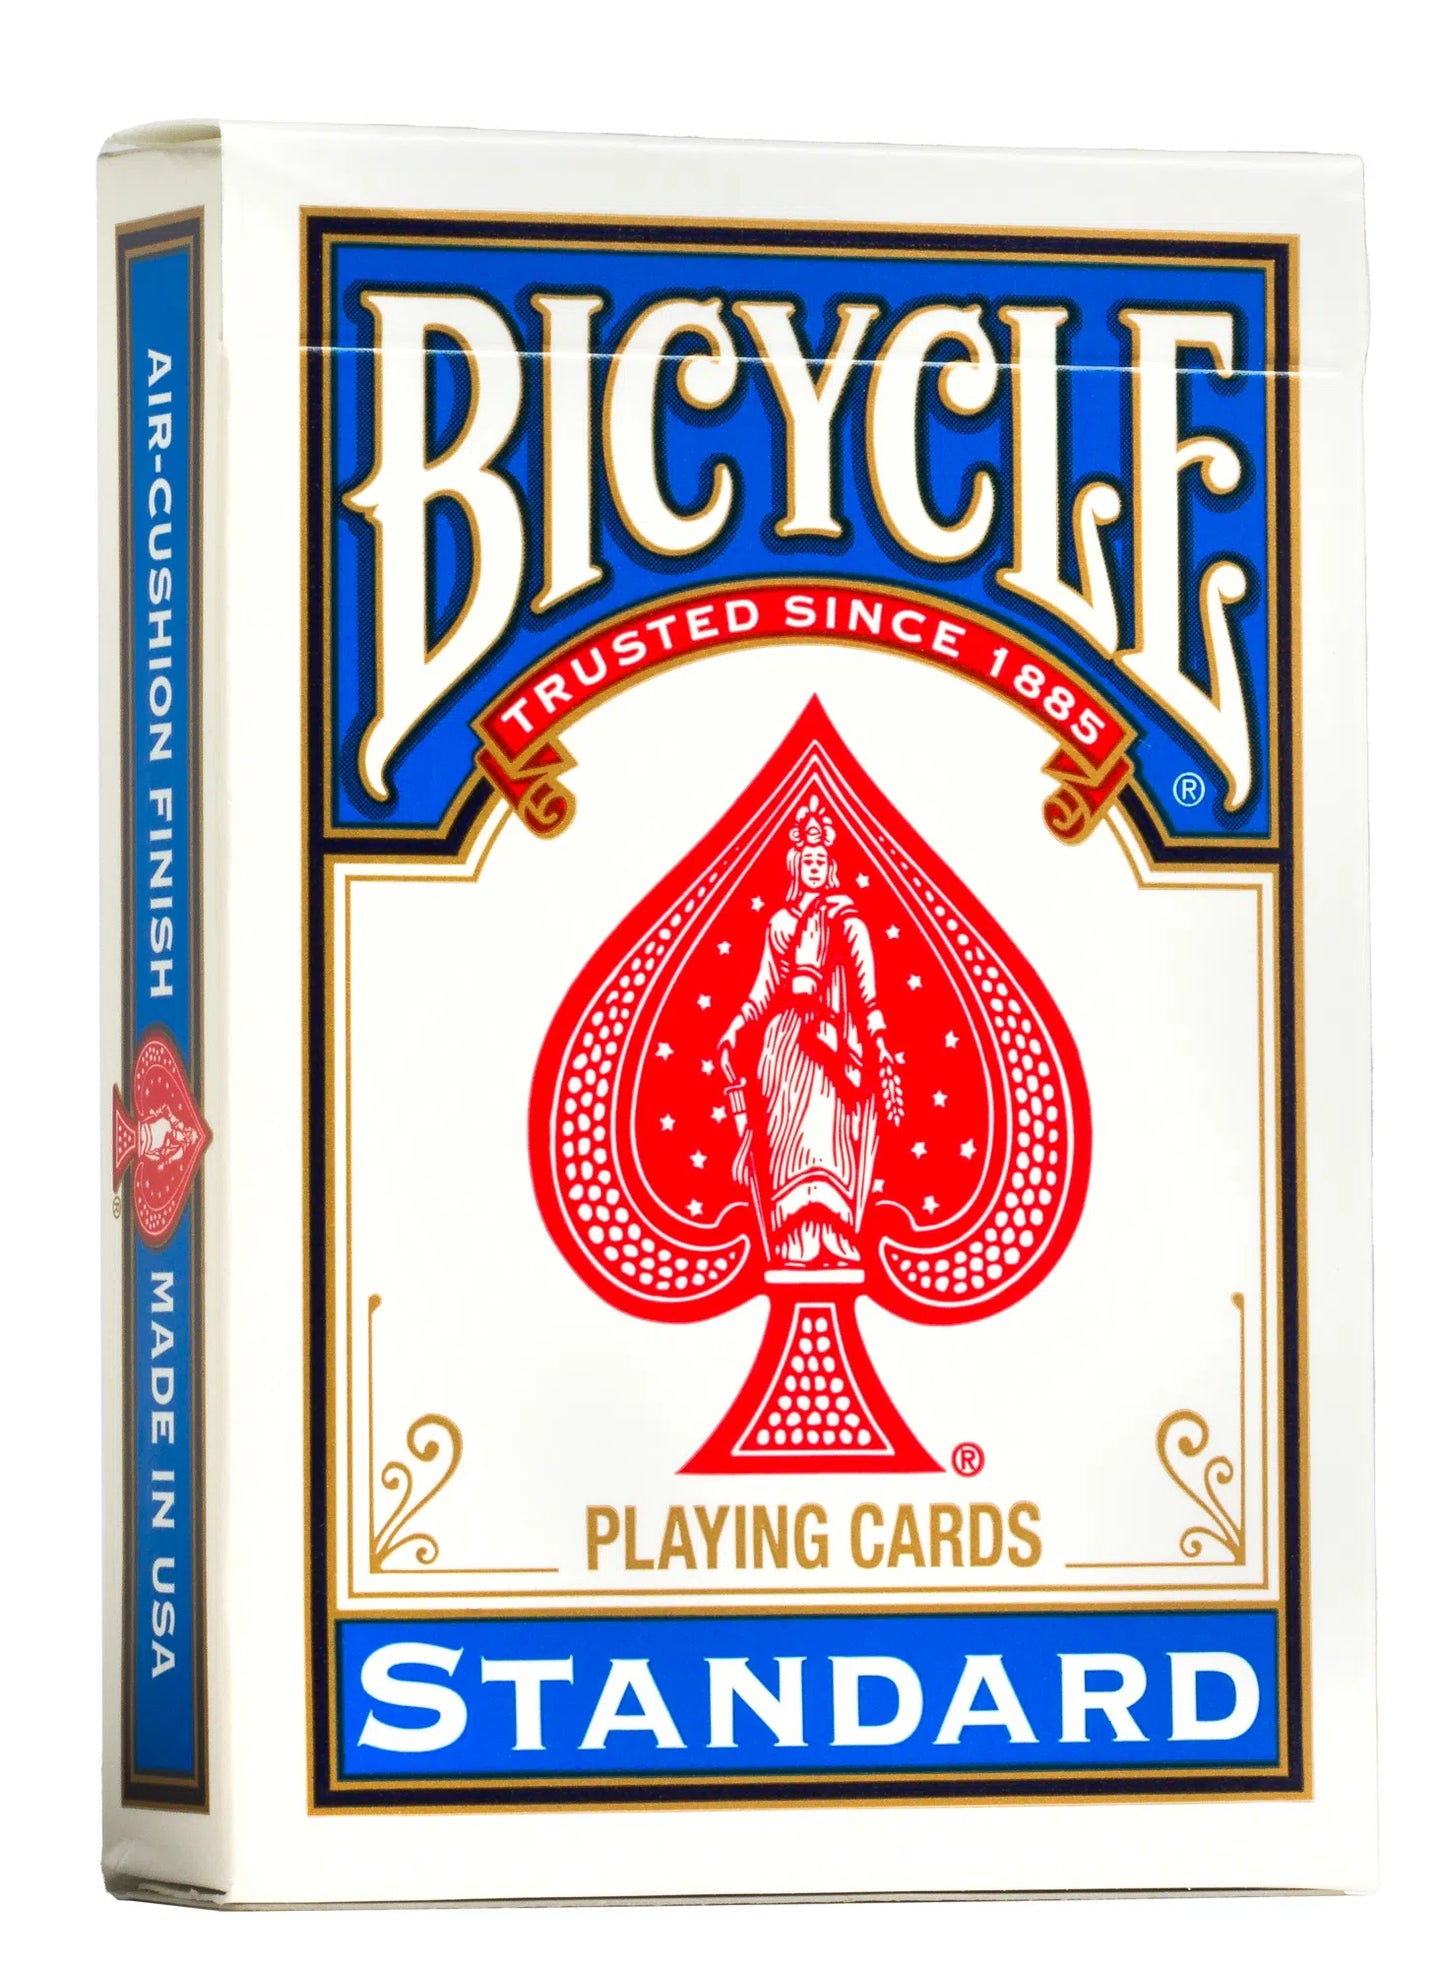 Bicycle: Gold Standard Playing Cards